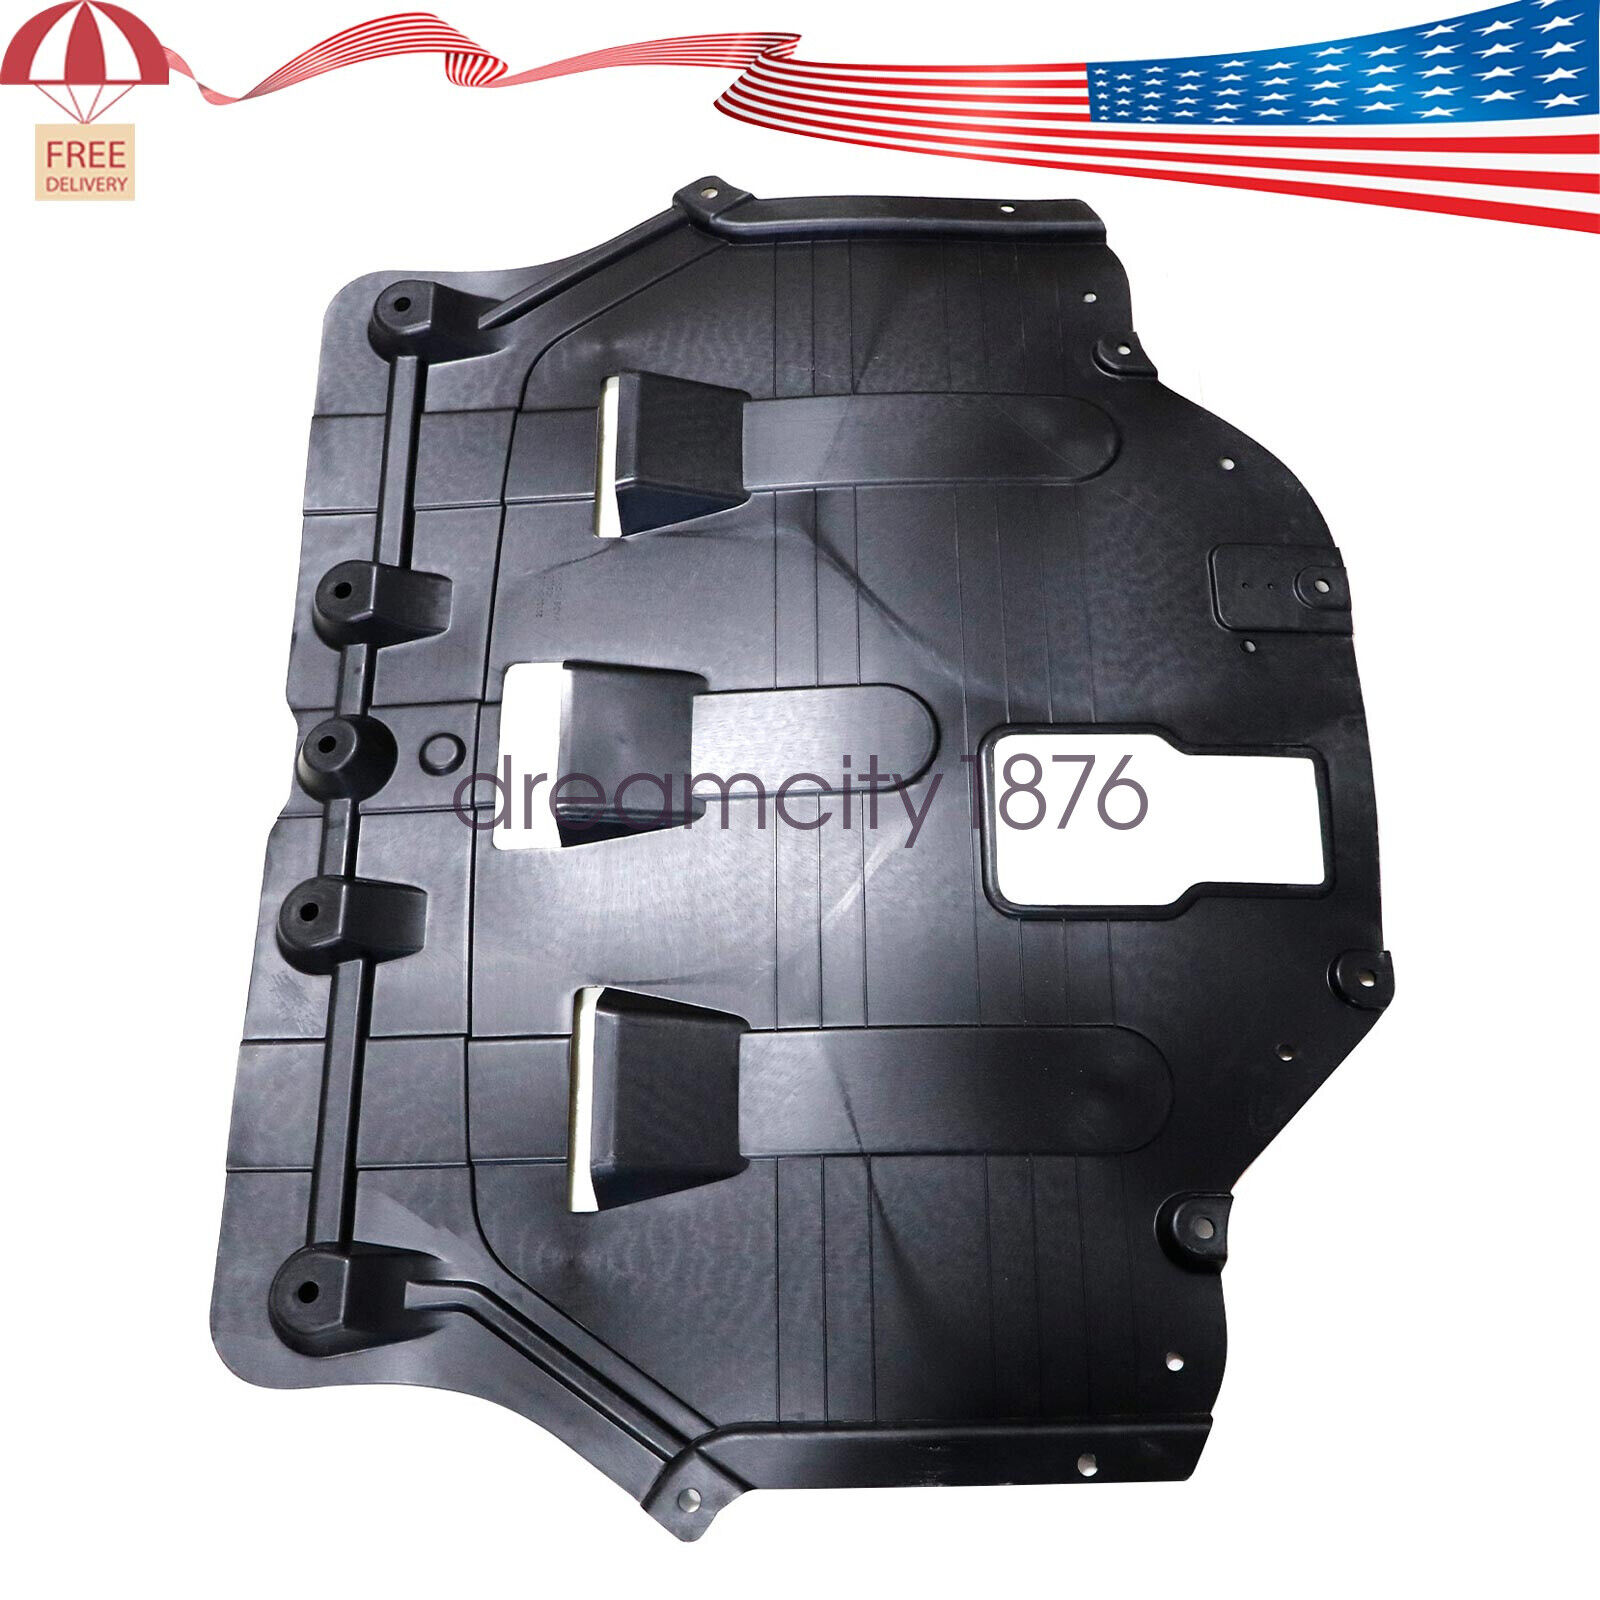 NEW Rear Engine Under Cover For 2016 2017 2018 2019 2020 Kia Optima 29130D5000